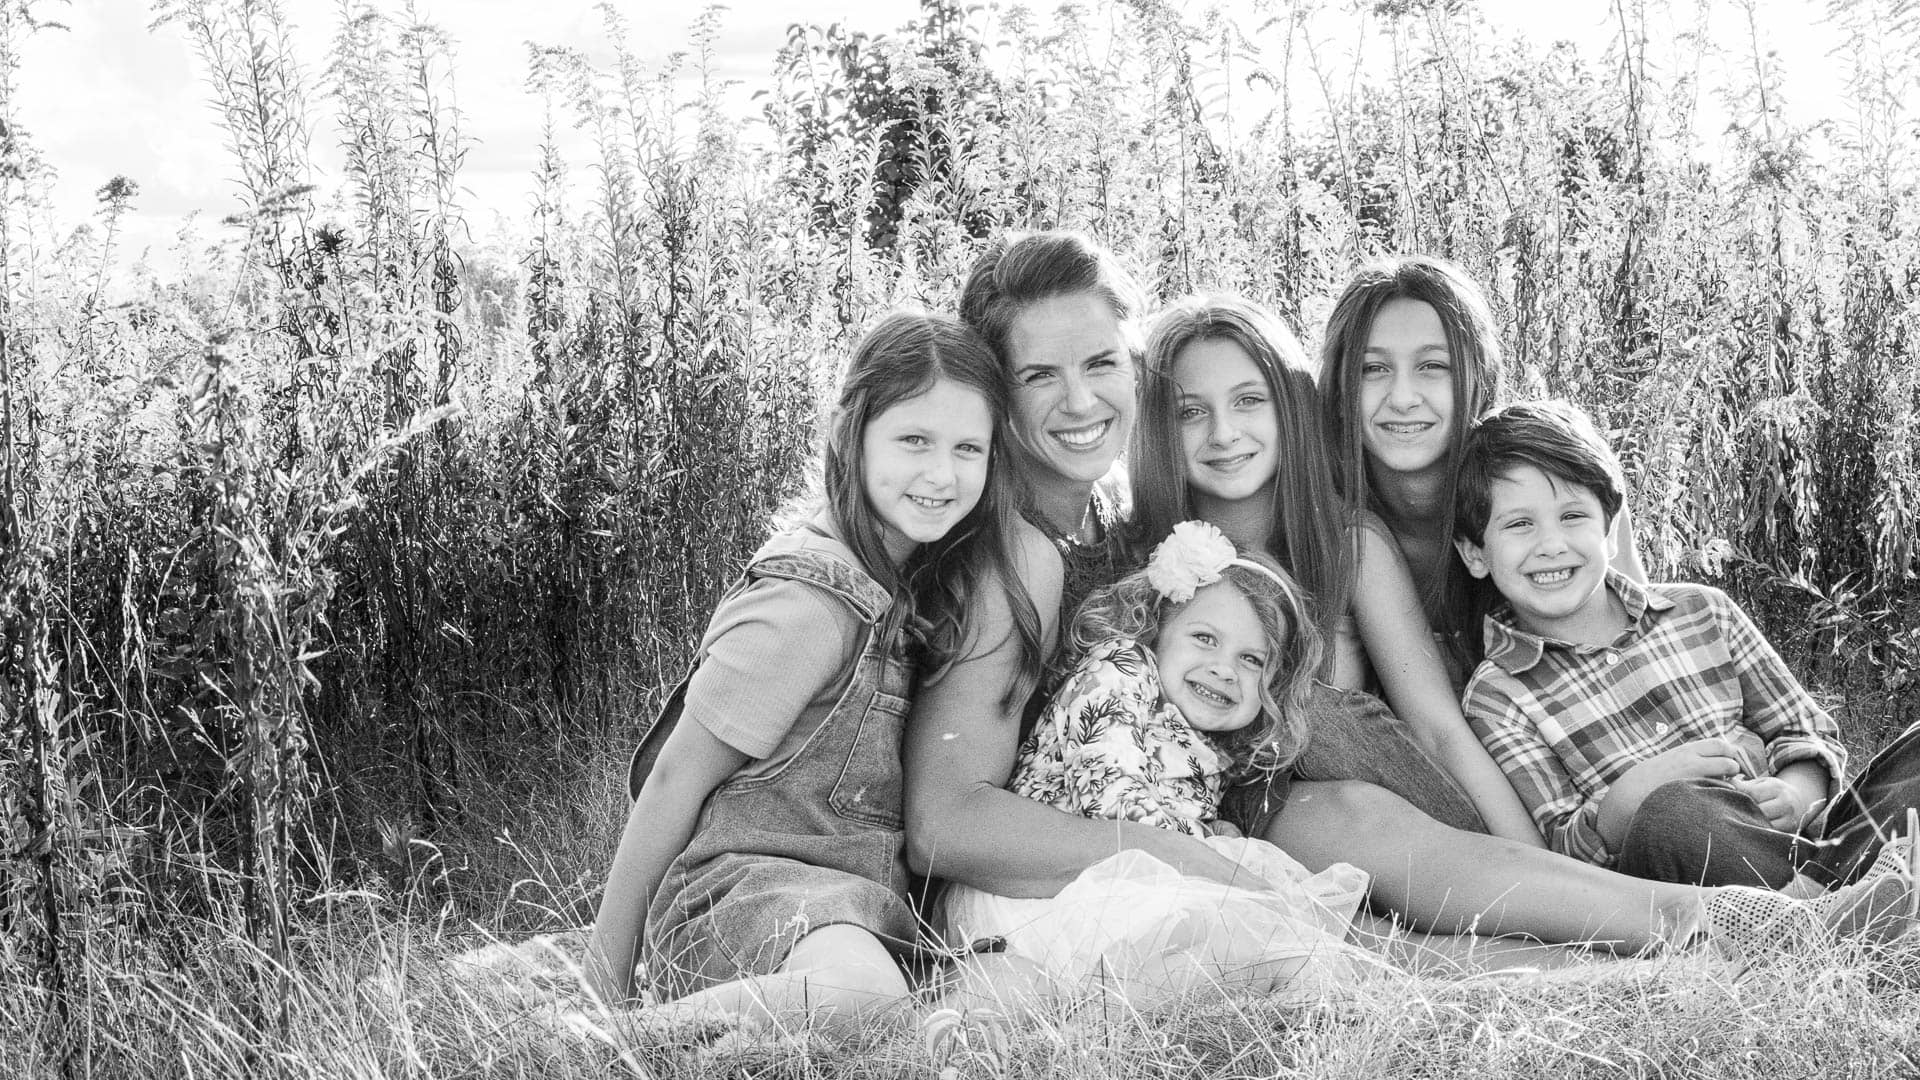 Beautiful Noblesville Family Portrait posed sitting together in a tall grassy field. This black and white image includes Mom, 4 daughters, and a son. There are smiles all around as the youngest two giggle. Photo Credit: Kate Plummer - Studio Kate Portrait Design - Noblesville Family Photographer